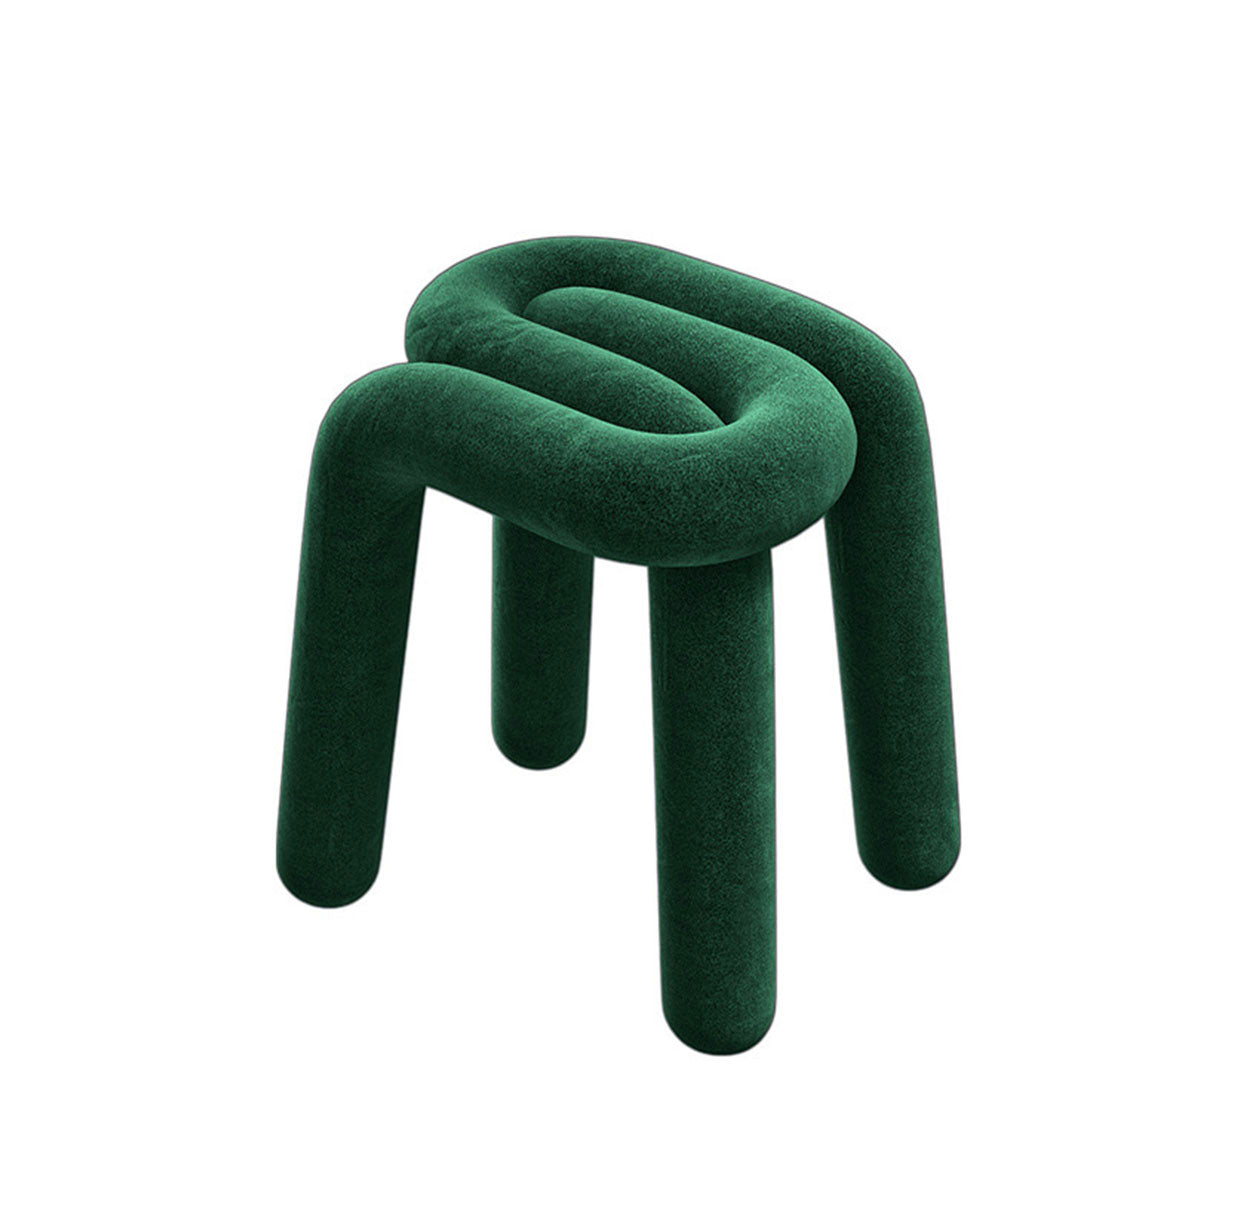 The Green Contemporary Stool